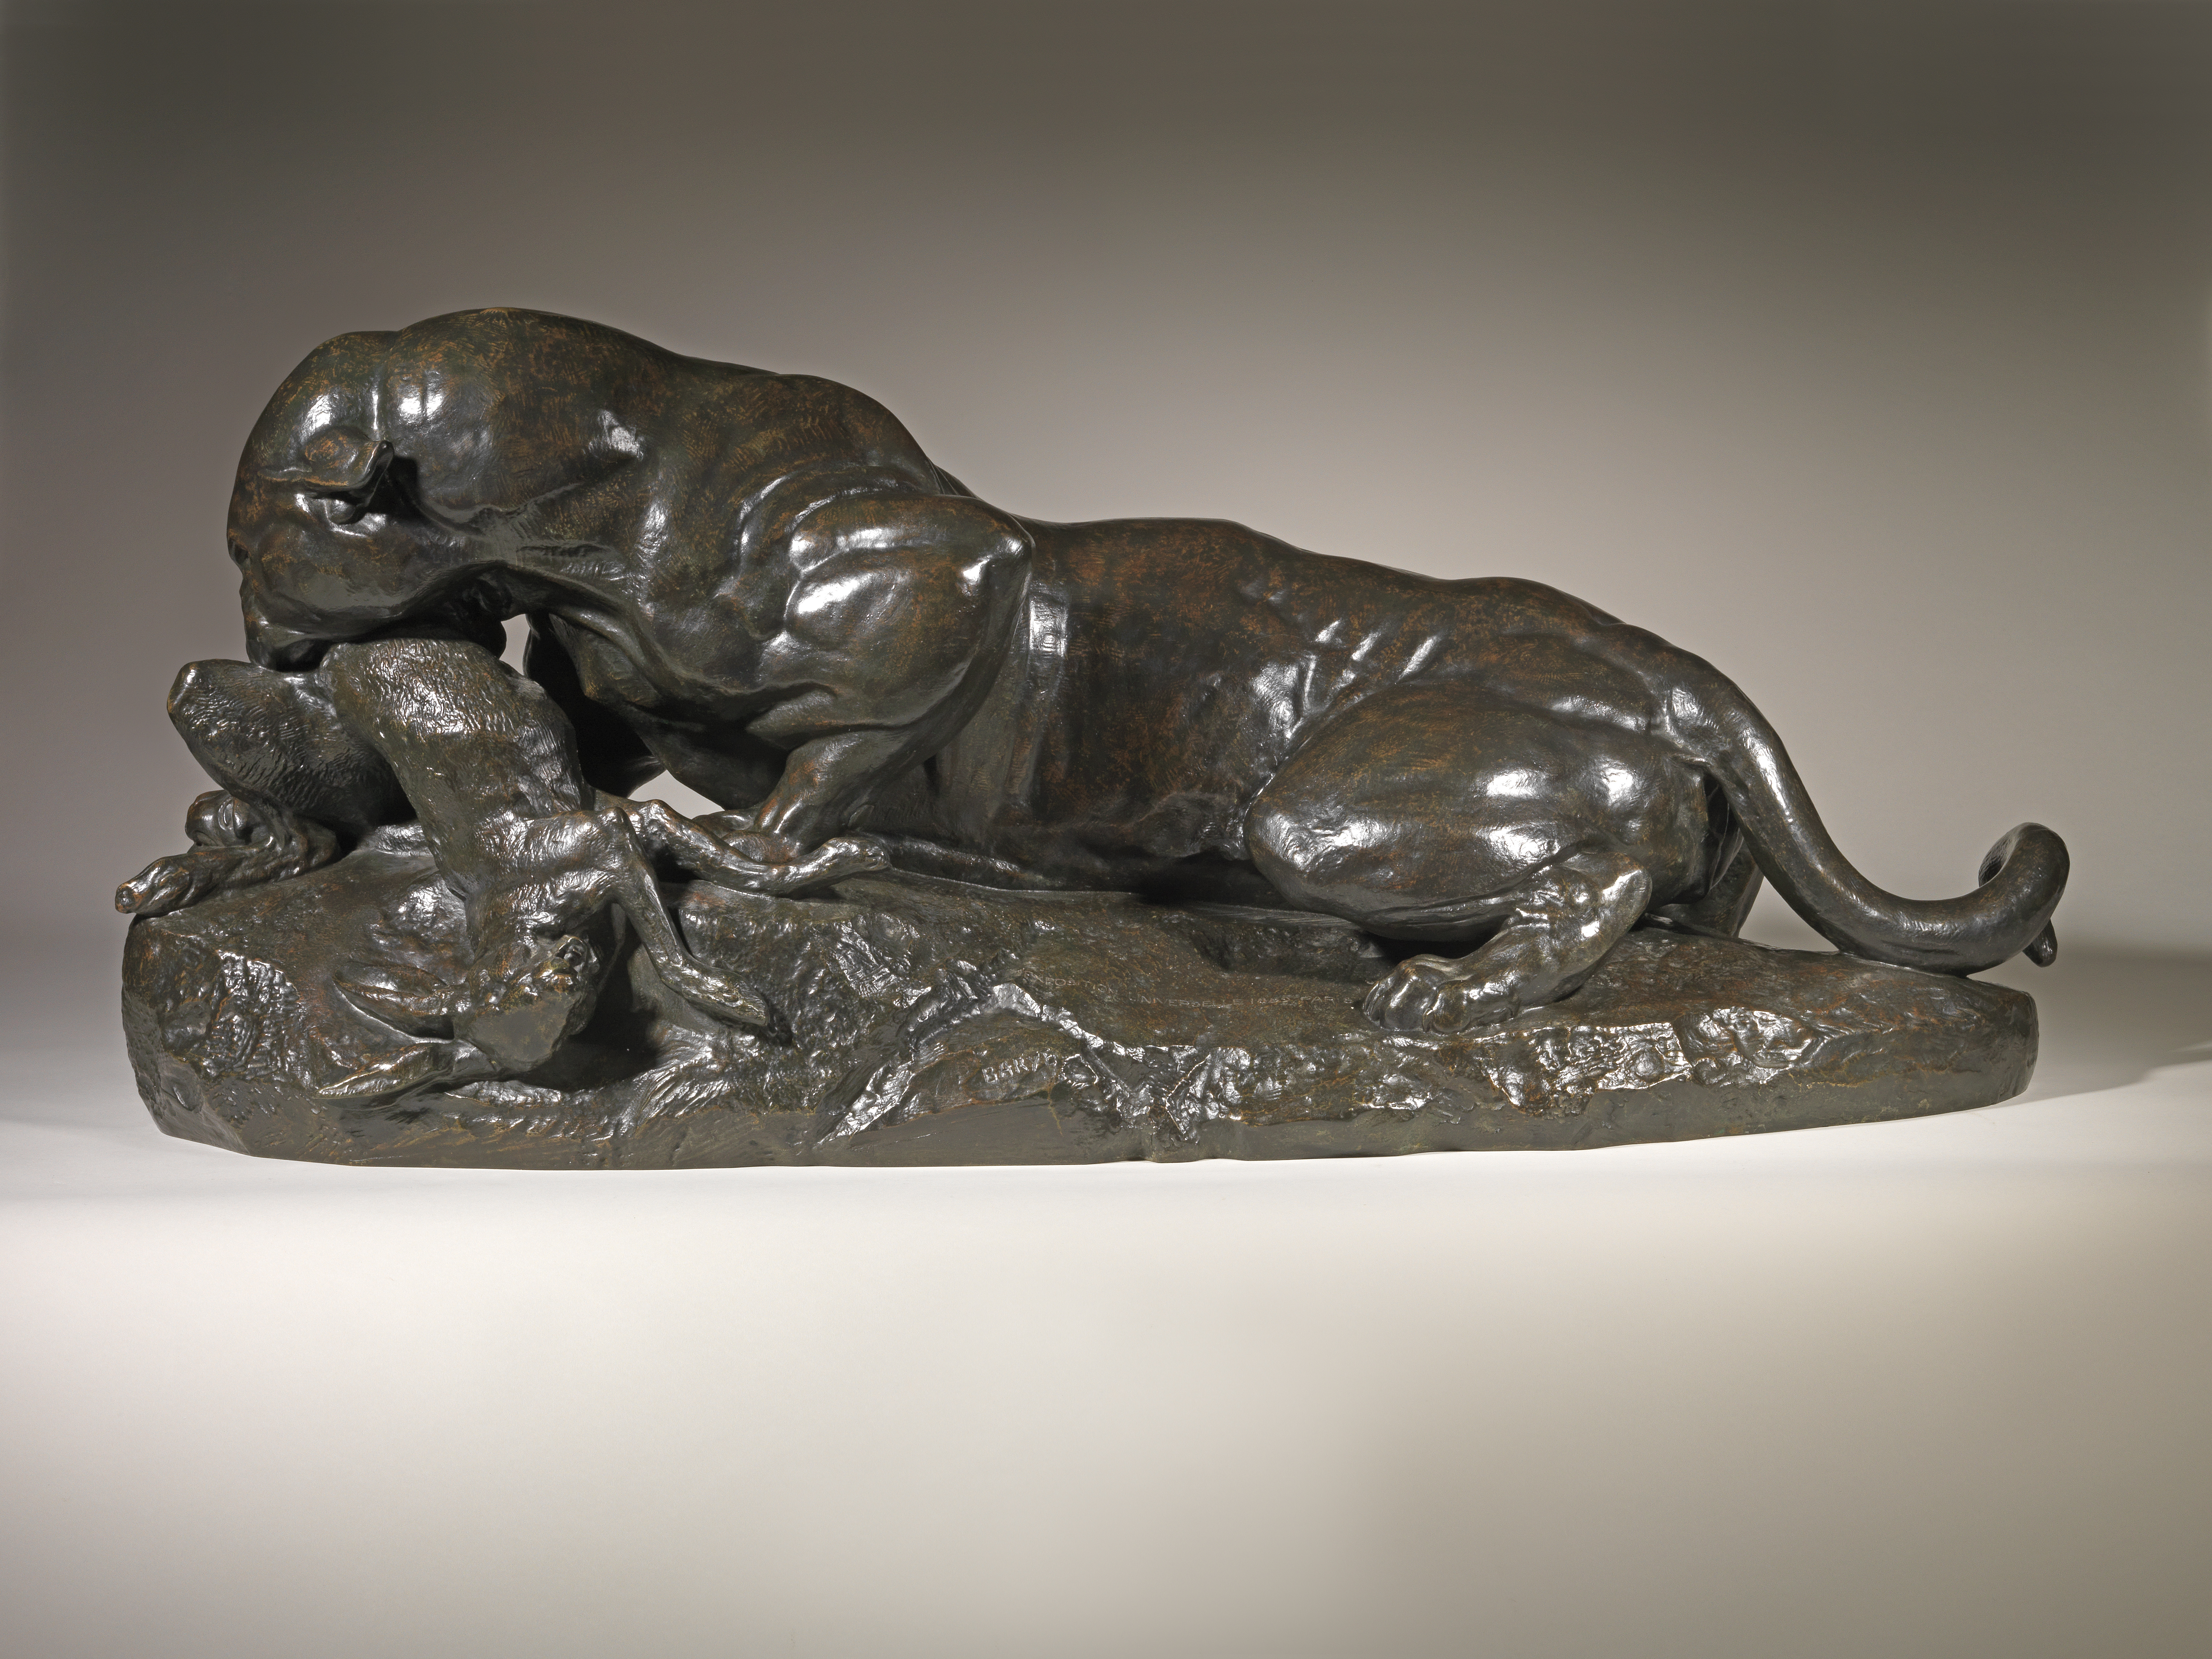 Jaguar and Hare, 1850